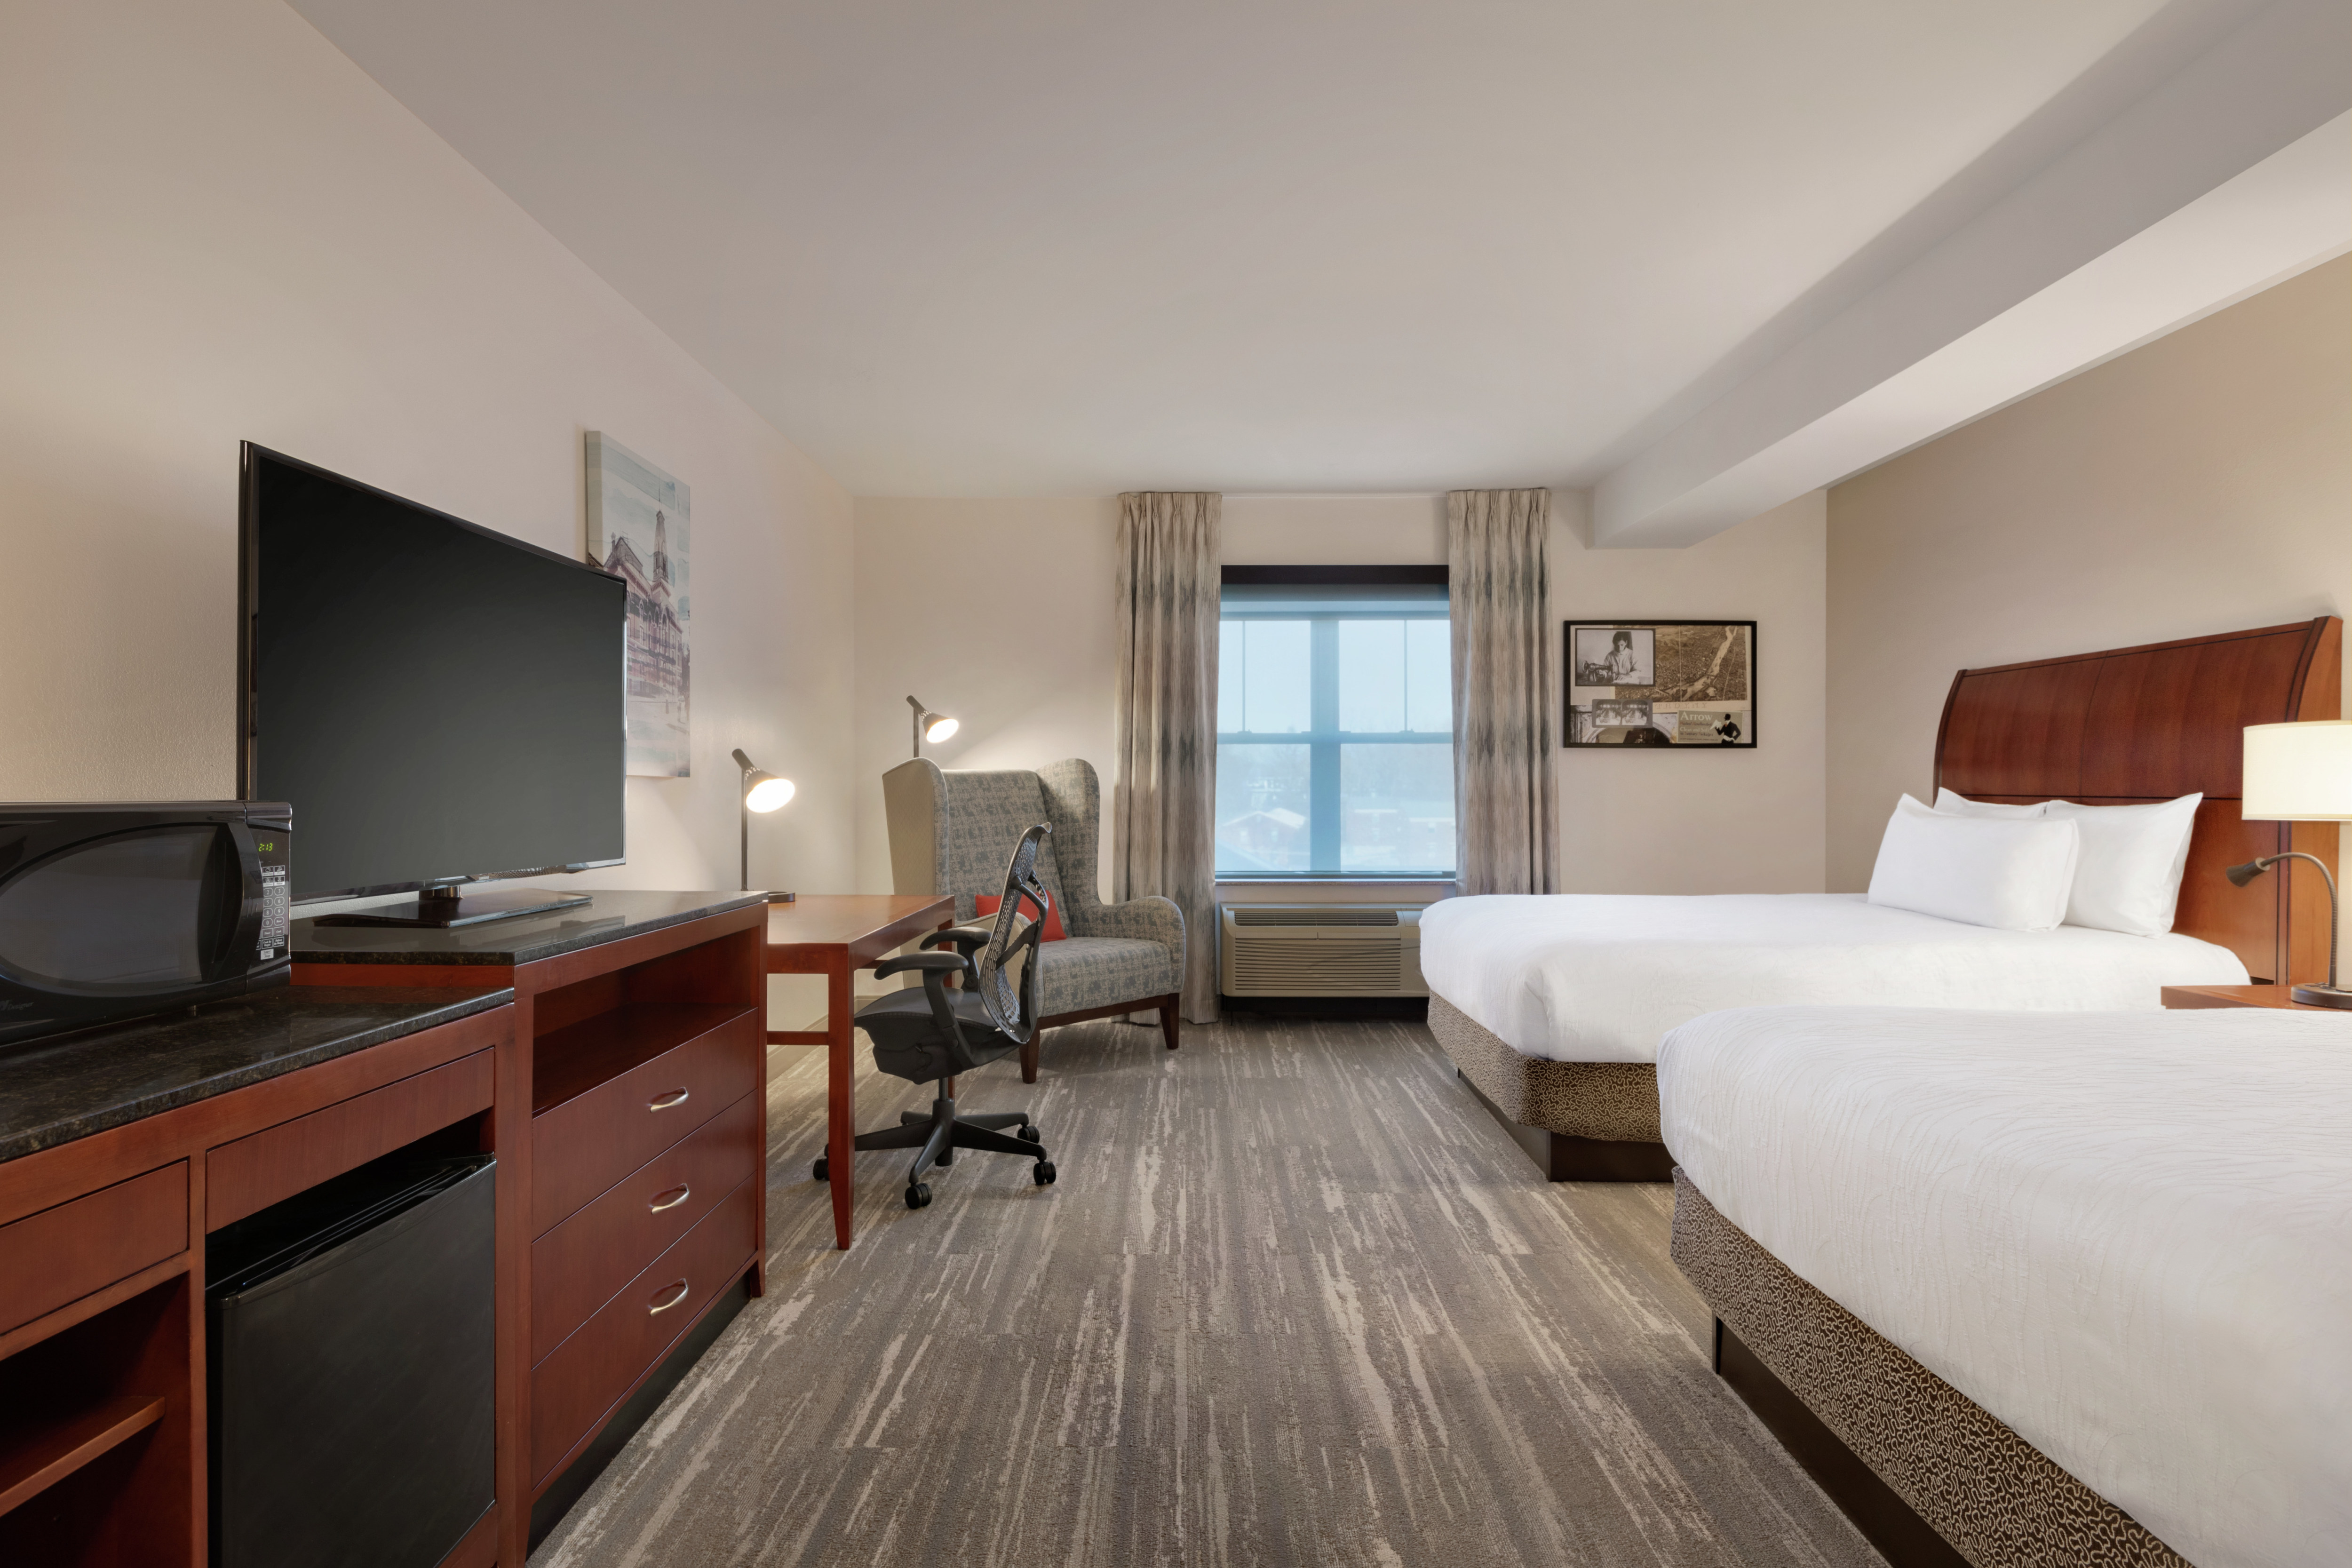 Spacious premium guestroom featuring convenient microwave and mini-fridge, TV, work desk, and two comfortable queen beds.